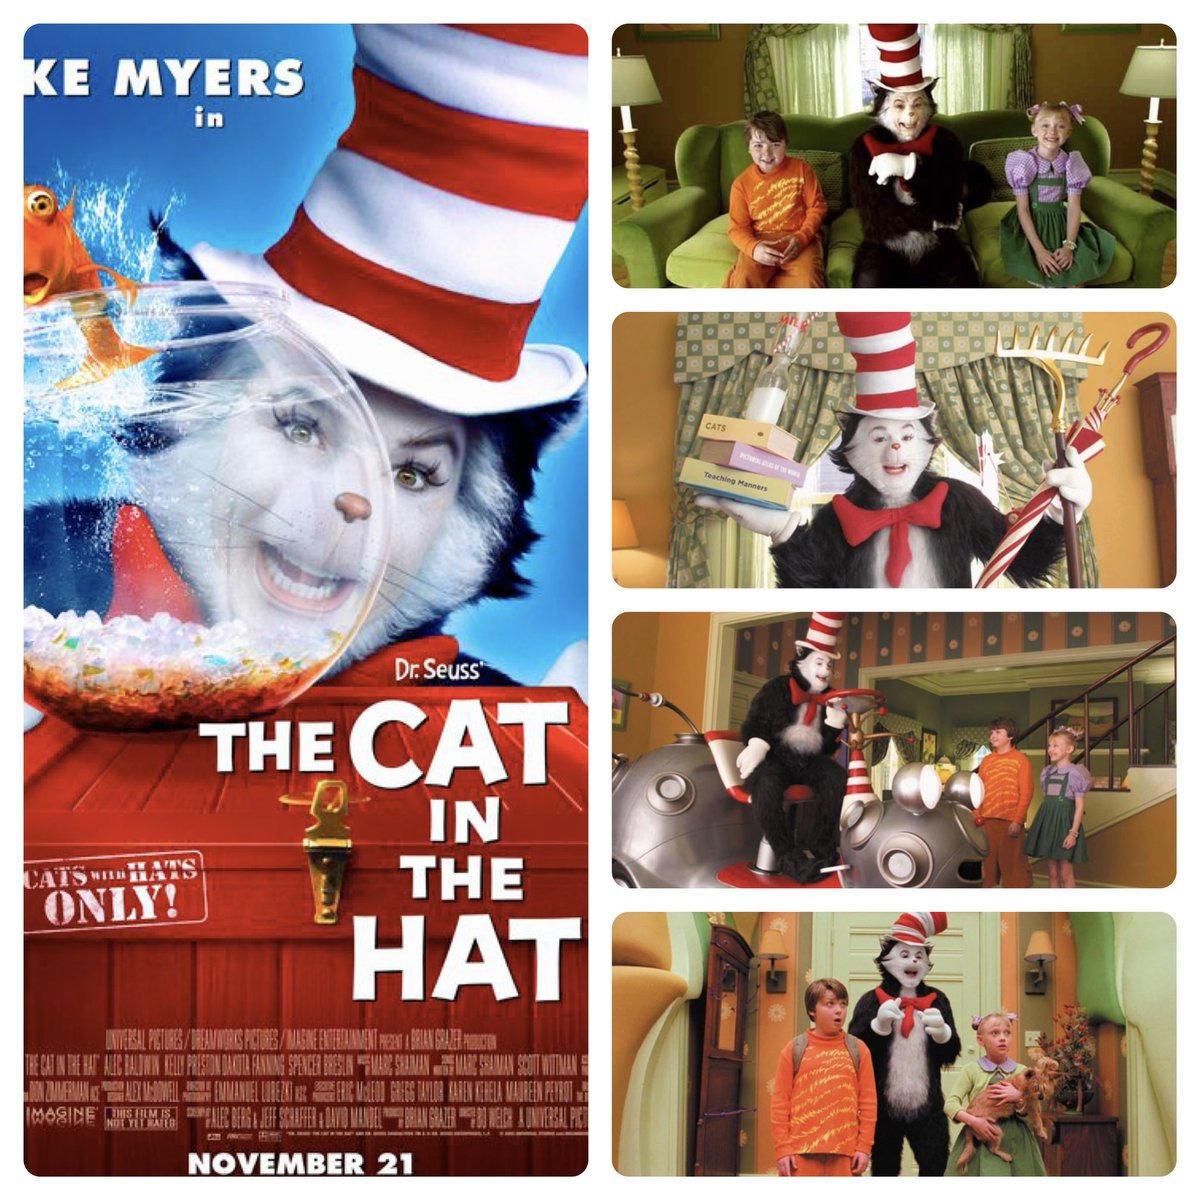 The Cat in the Hat celebrates 20th anniversary today.
#thecatinthehat #catinthehat #drseuss #drseussbooks #doctorseuss #mikemyers #thing1thing2 #thing1andthing2 #thing1 #thing2 #universalstudios #universalpictures #universalcitystudios #dreamworkspictures #imagineentertainment